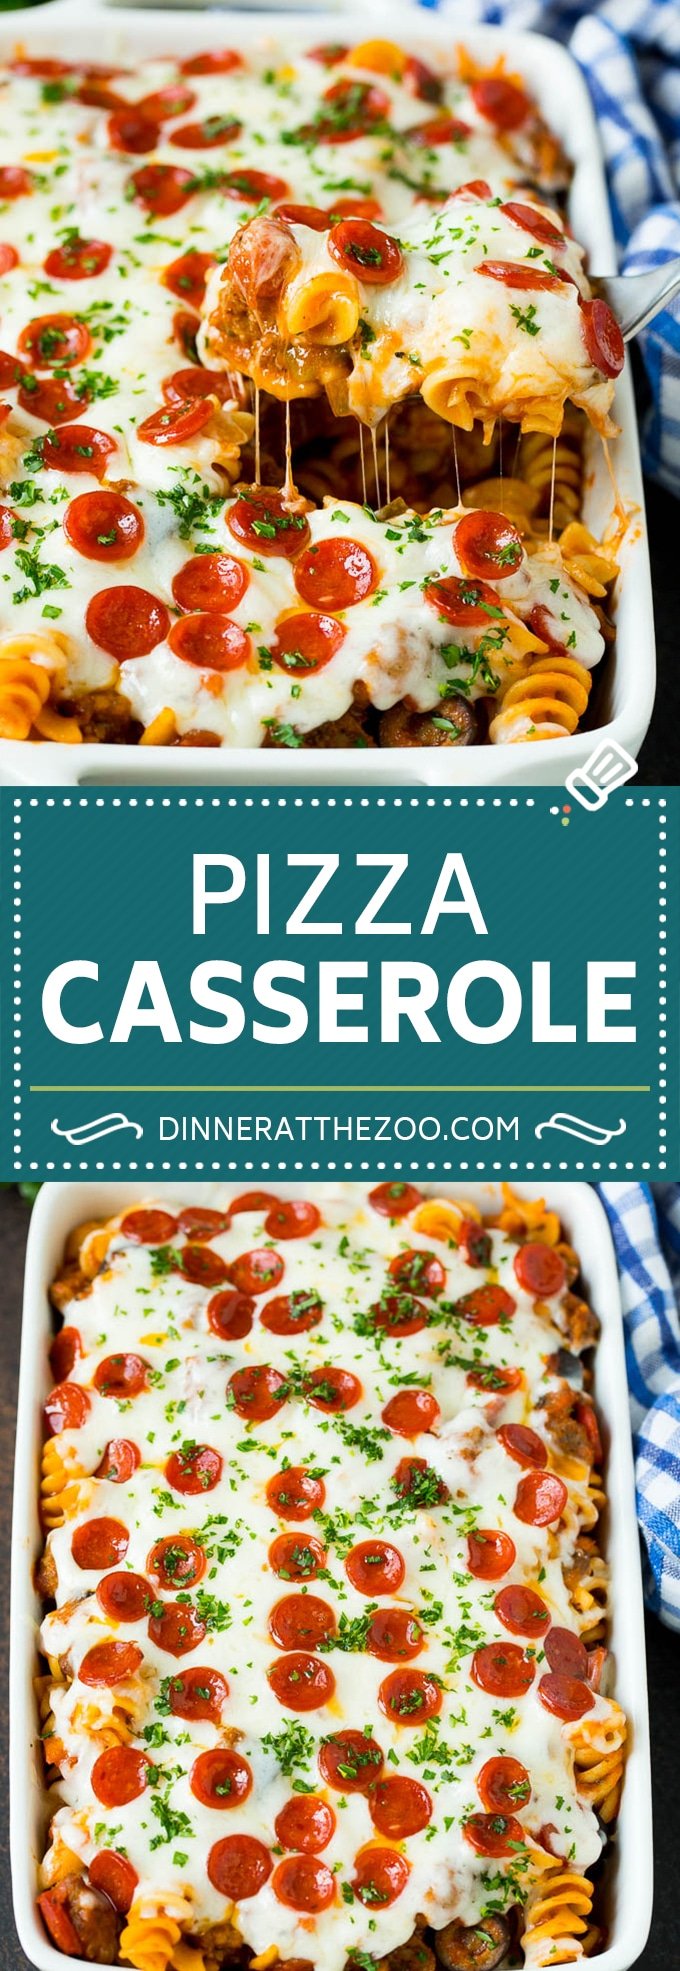 This pizza casserole is pasta simmered in tomato sauce with pepperoni, sausage, olives and bell peppers.